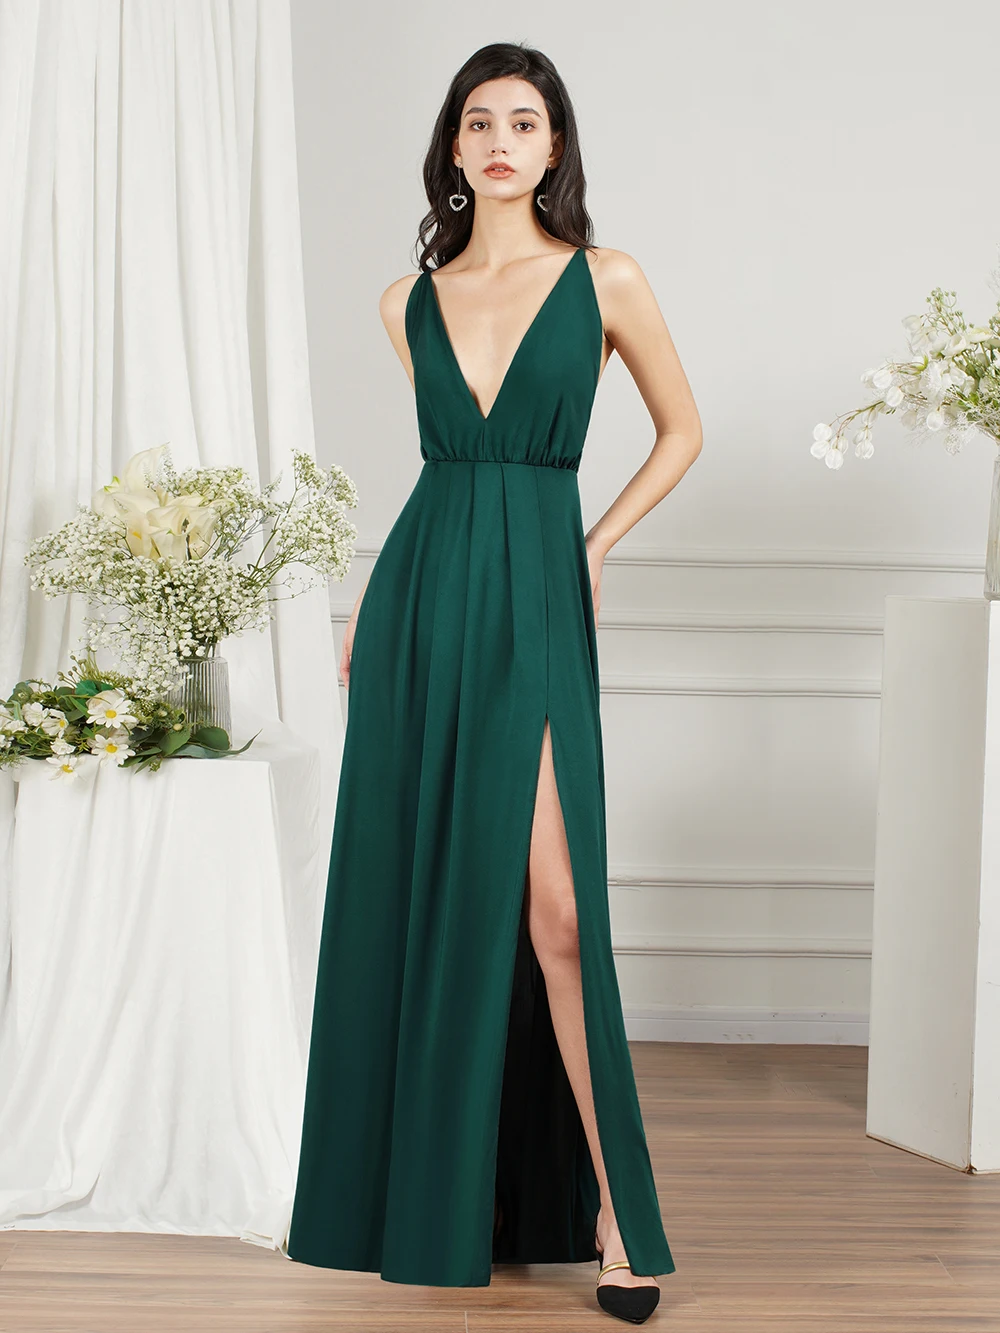 long evening gowns Ladies Sexy Evening Dresses Long A-line Deep V-Neck Cross Straps Backless Split Side Evening Prom Gown Women Maxi Club Dress2022 ball gown